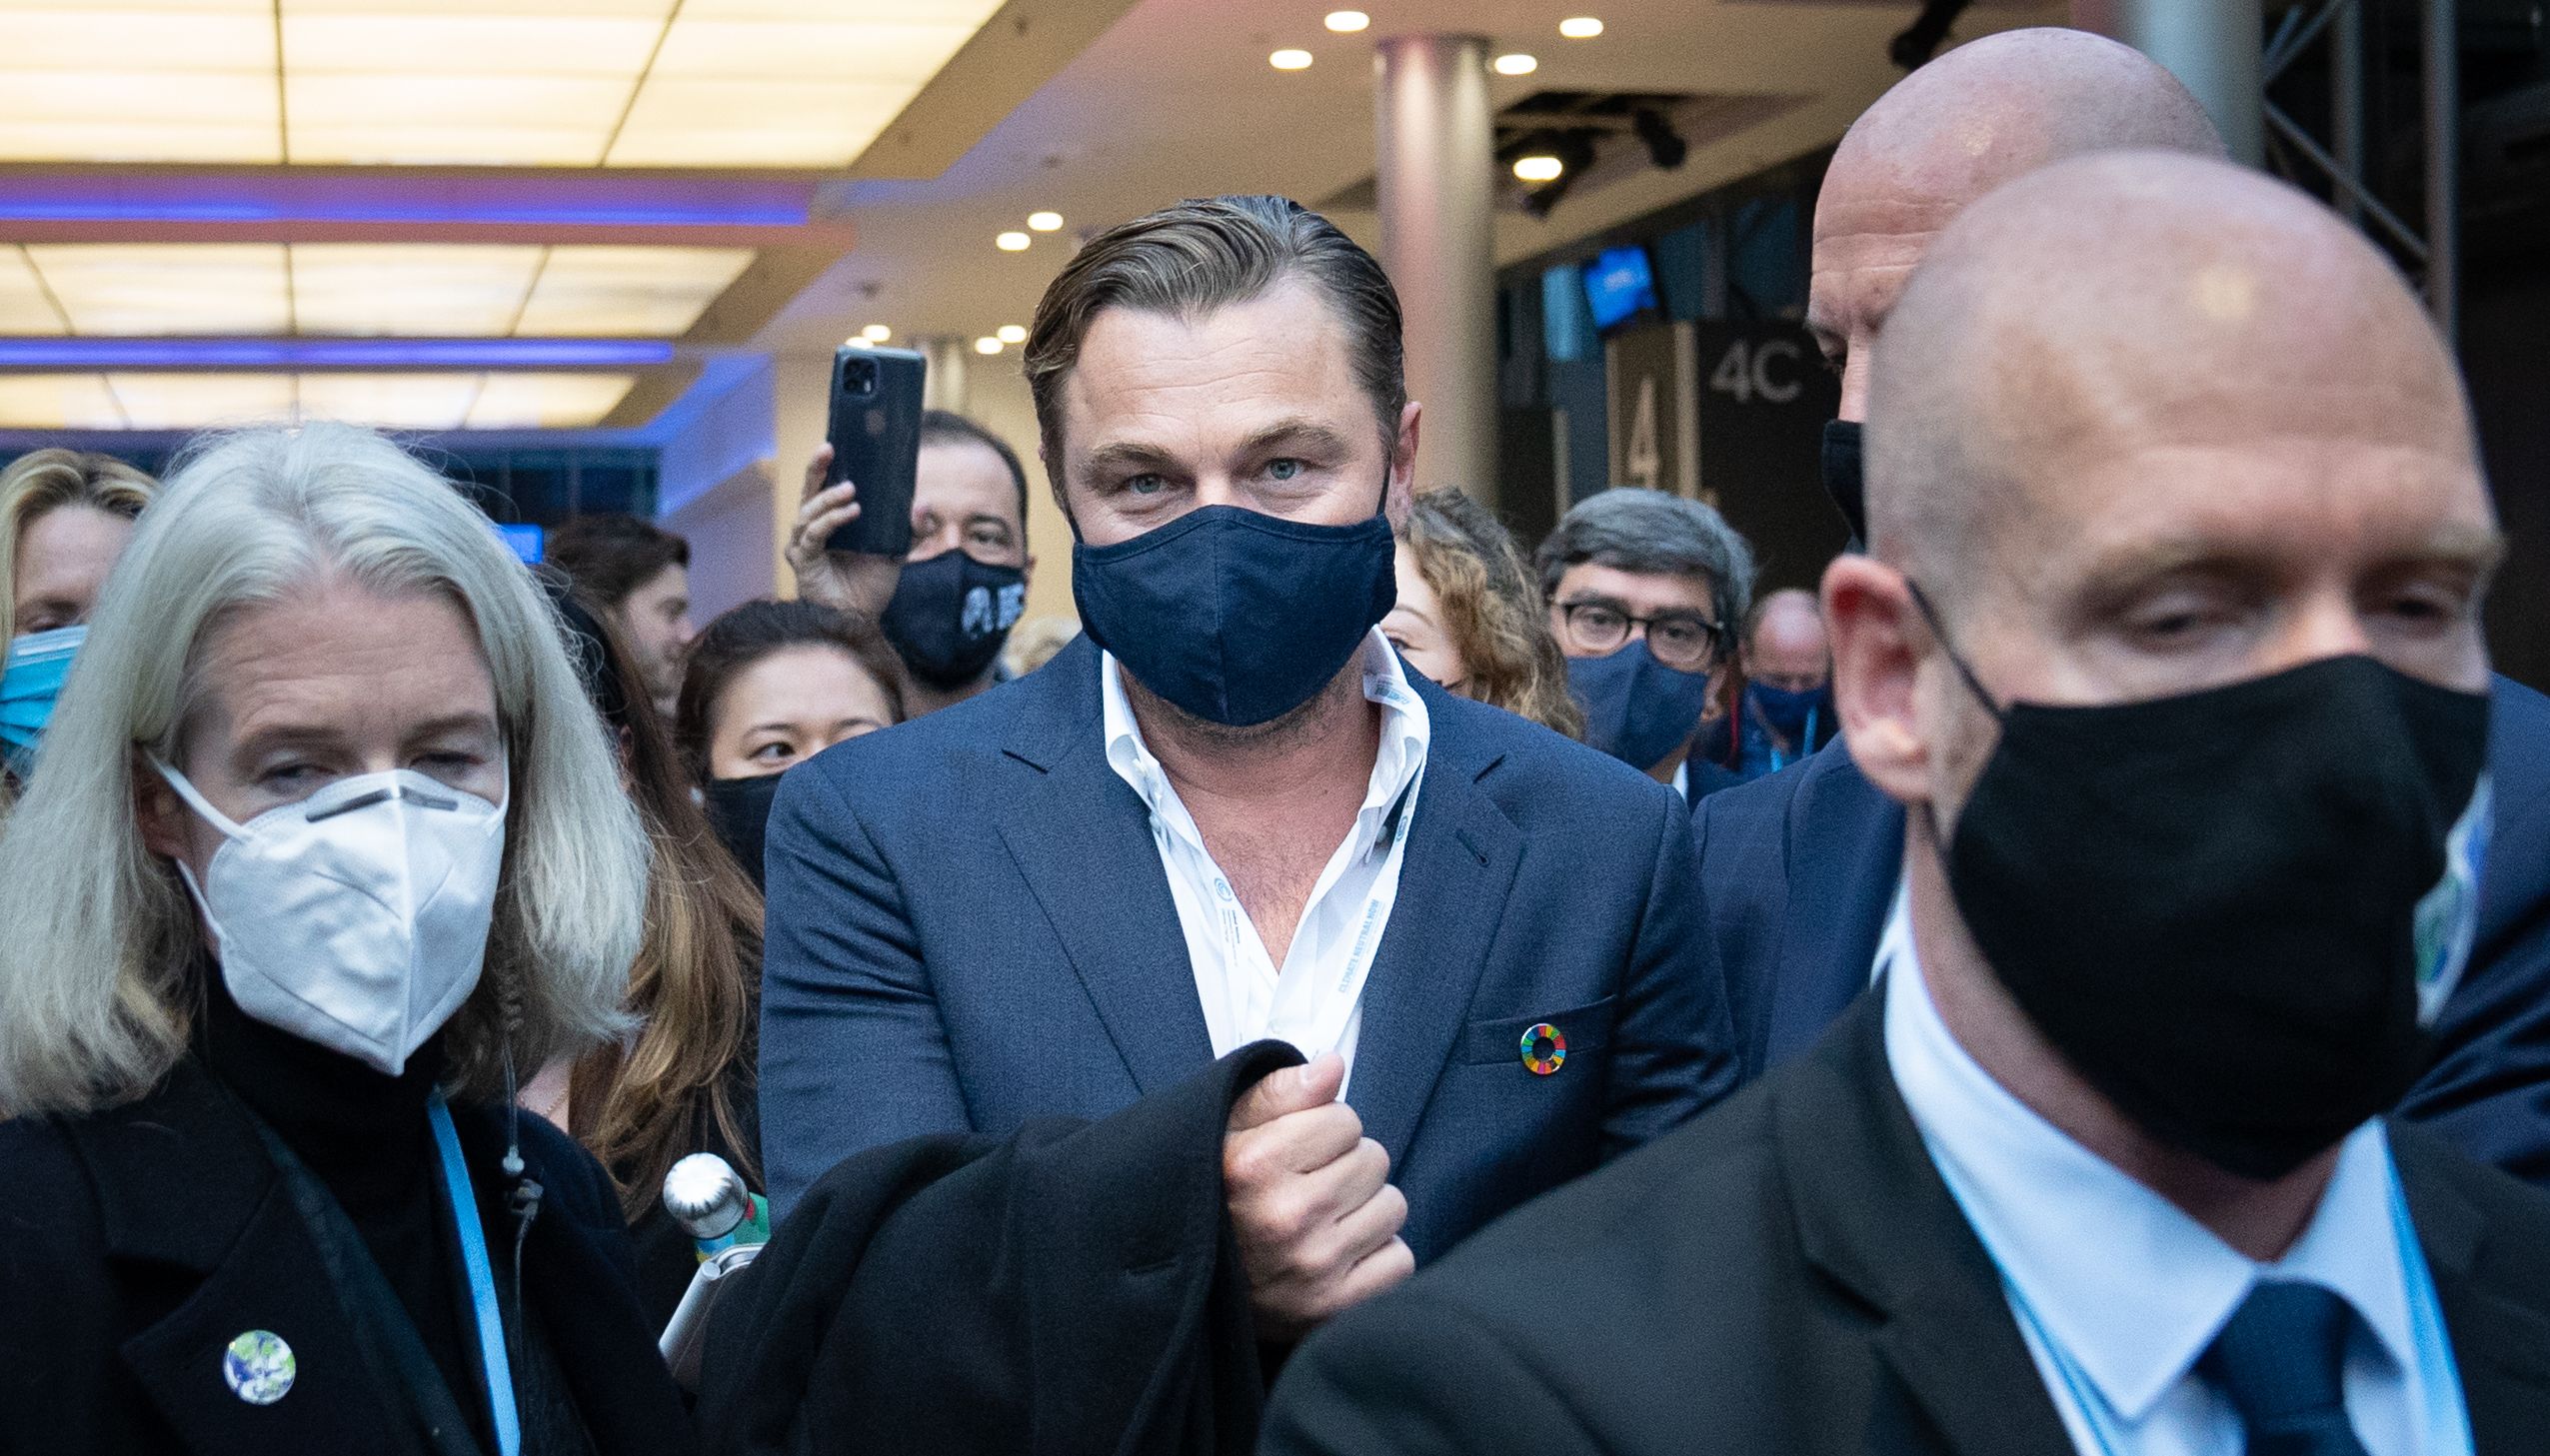 Leonardo DiCaprio walks through the exhibition hall after attending an event at the Cop26 summit in Glasgow.